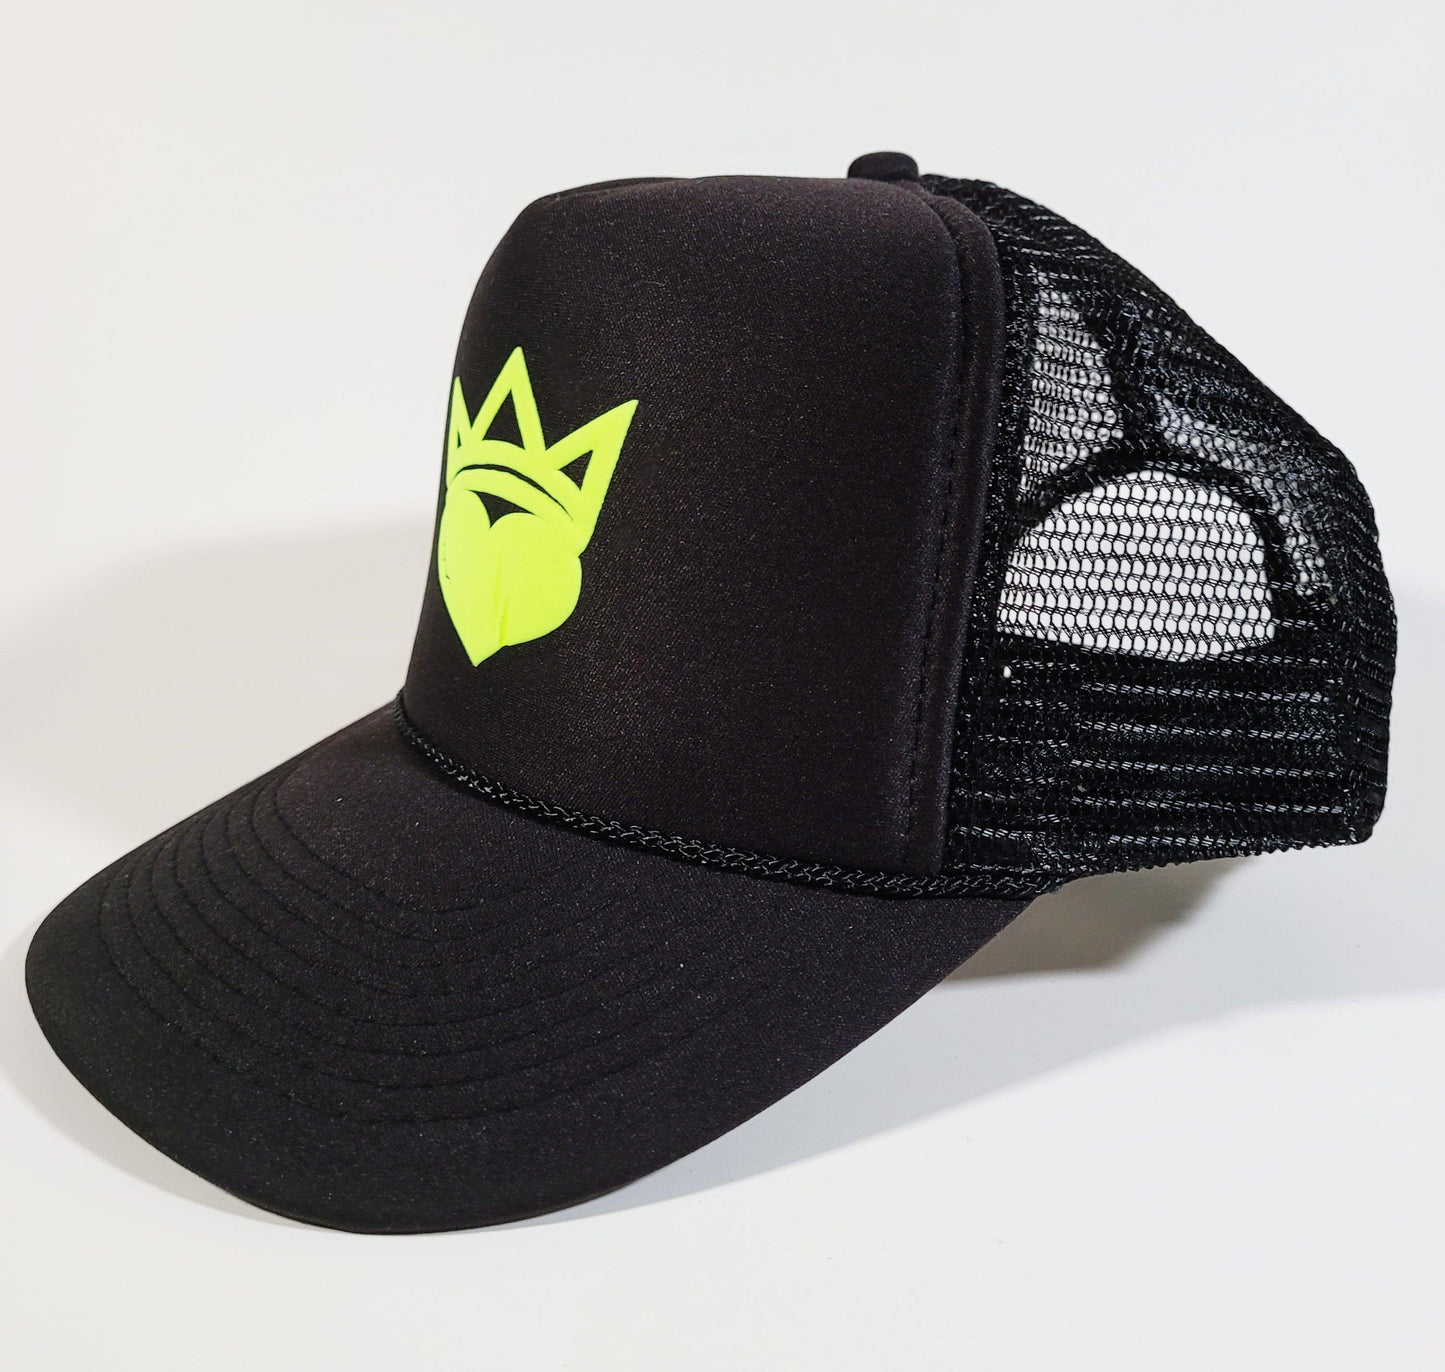 Black & Fluorescent Yellow "King/Queen Of Hearts" Trucker Hat - Official Crown Store